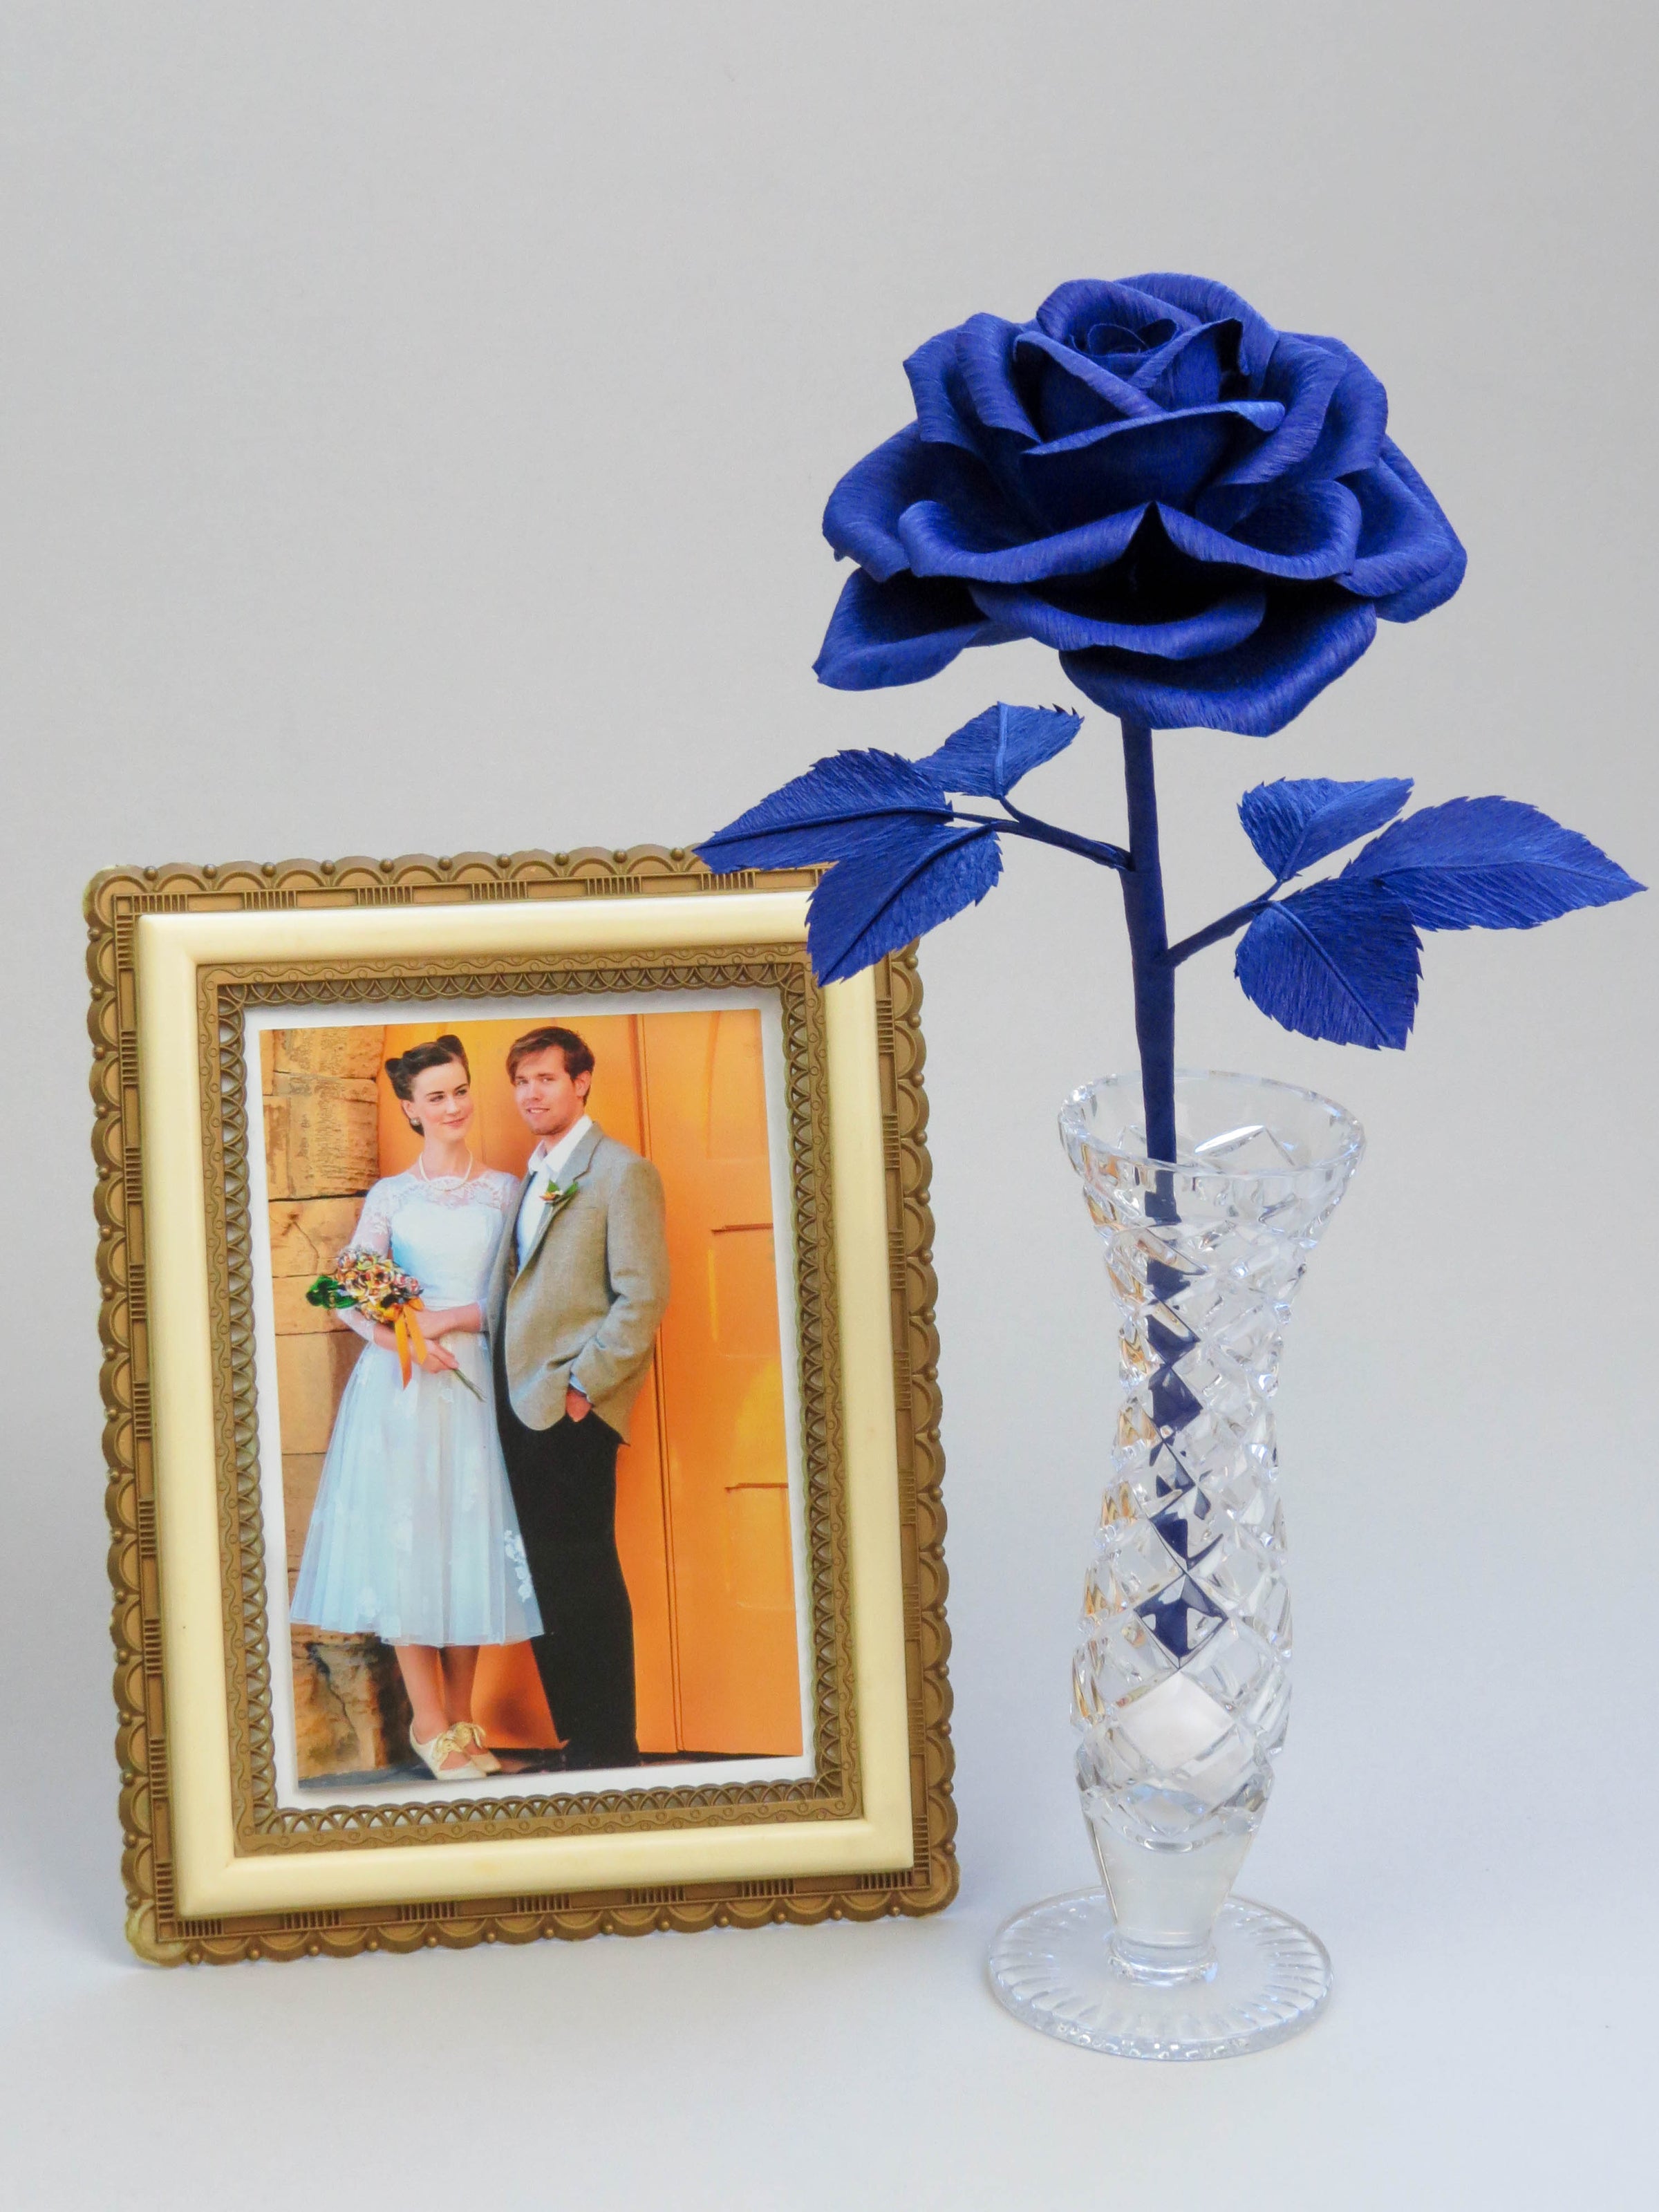 Sapphire blue crepe paper rose with six sapphire blue leaves standing in a slender glass vase with a vintage cream and gold framed wedding photo standing beside it of a bride wearing a 1950s white wedding dress and holding a bouquet of paper flowers, with a groom in a grey jacket and black trousers standing to her right